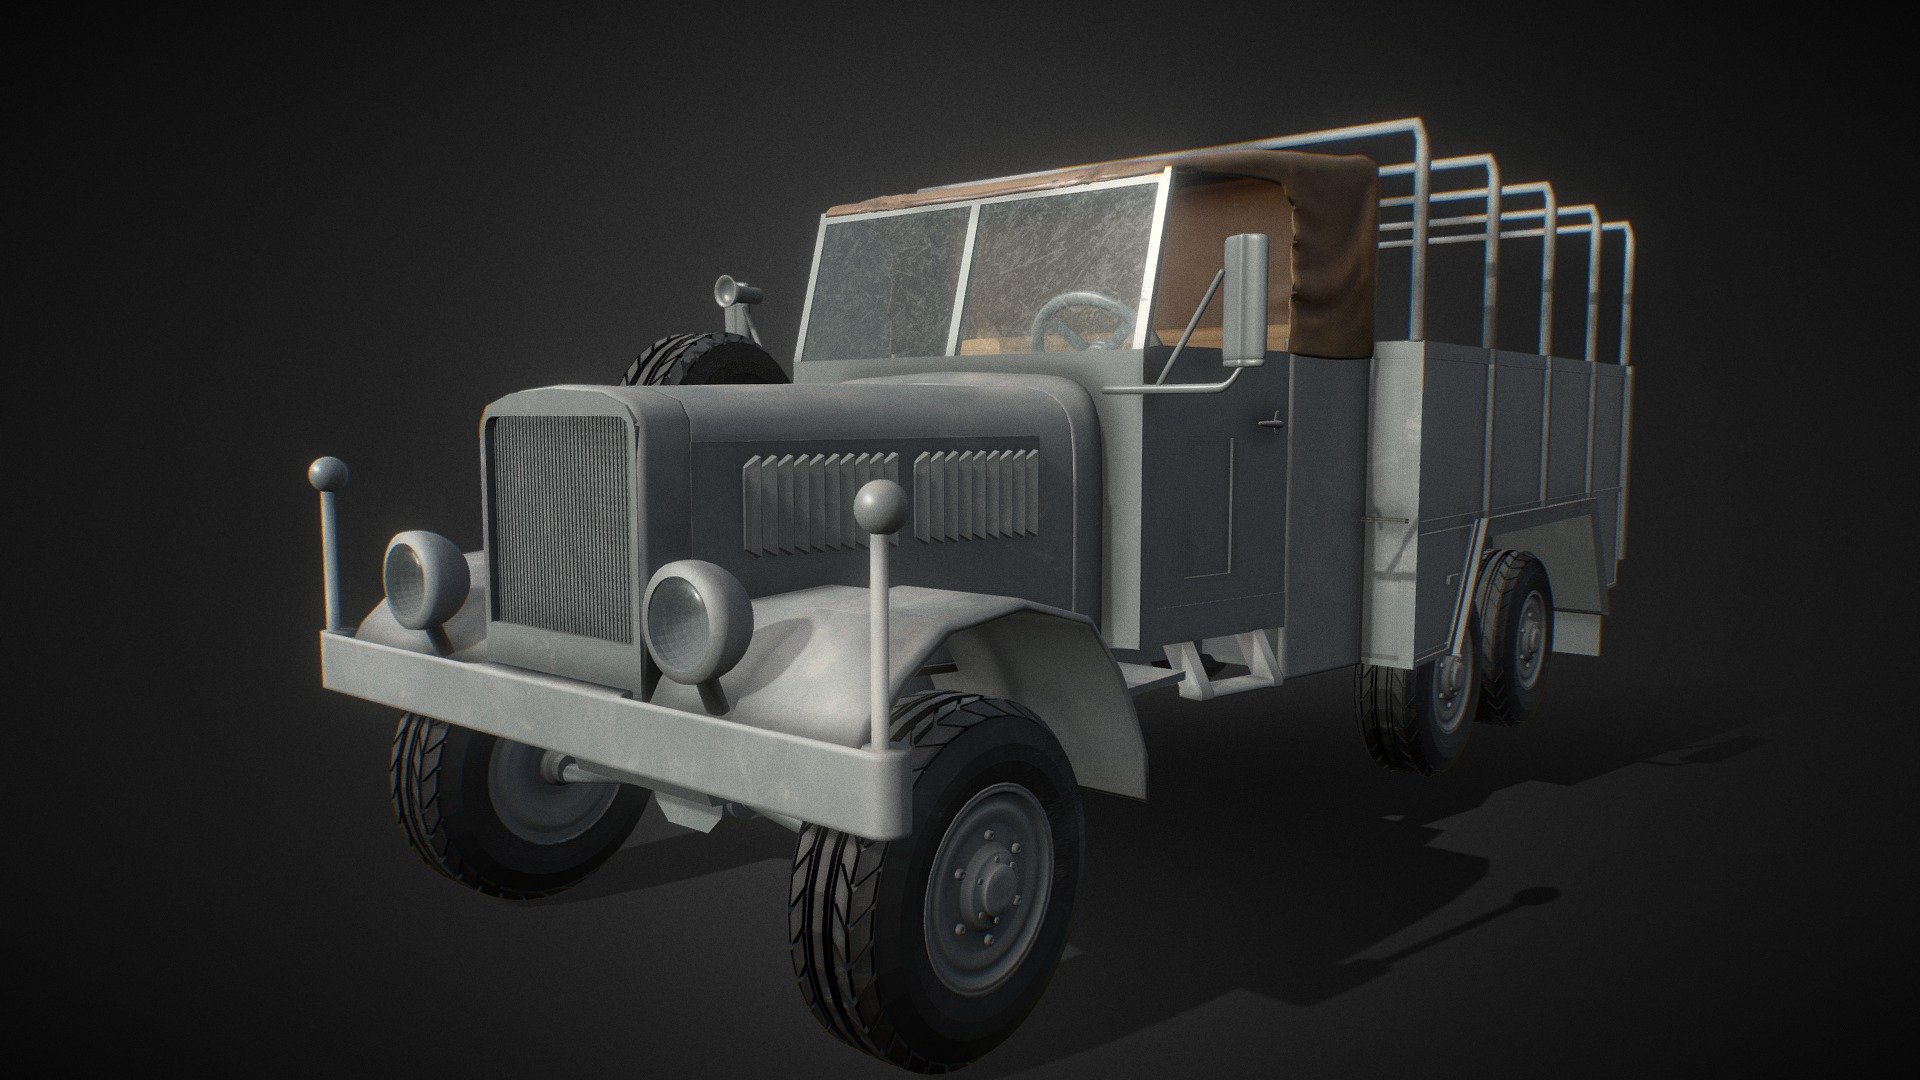 ww2 German army 6x6 truck - Einheitsdiesel  modeled in a Blender 3d . 

I made the textures in quixel mixer. Tested it in unreal engine 5

has : - 4k Texture (PBR)  

9 materials
8 kinds of colors
UVs
doesn't have : 

doesnt have rig
doesnt have engine
doesnt driver's cabin 
60 000 Vertices ! (125 000 polygons) - German ww2 truck - Einheitsdiesel - Buy Royalty Free 3D model by vojtech.vejtasa 3d model